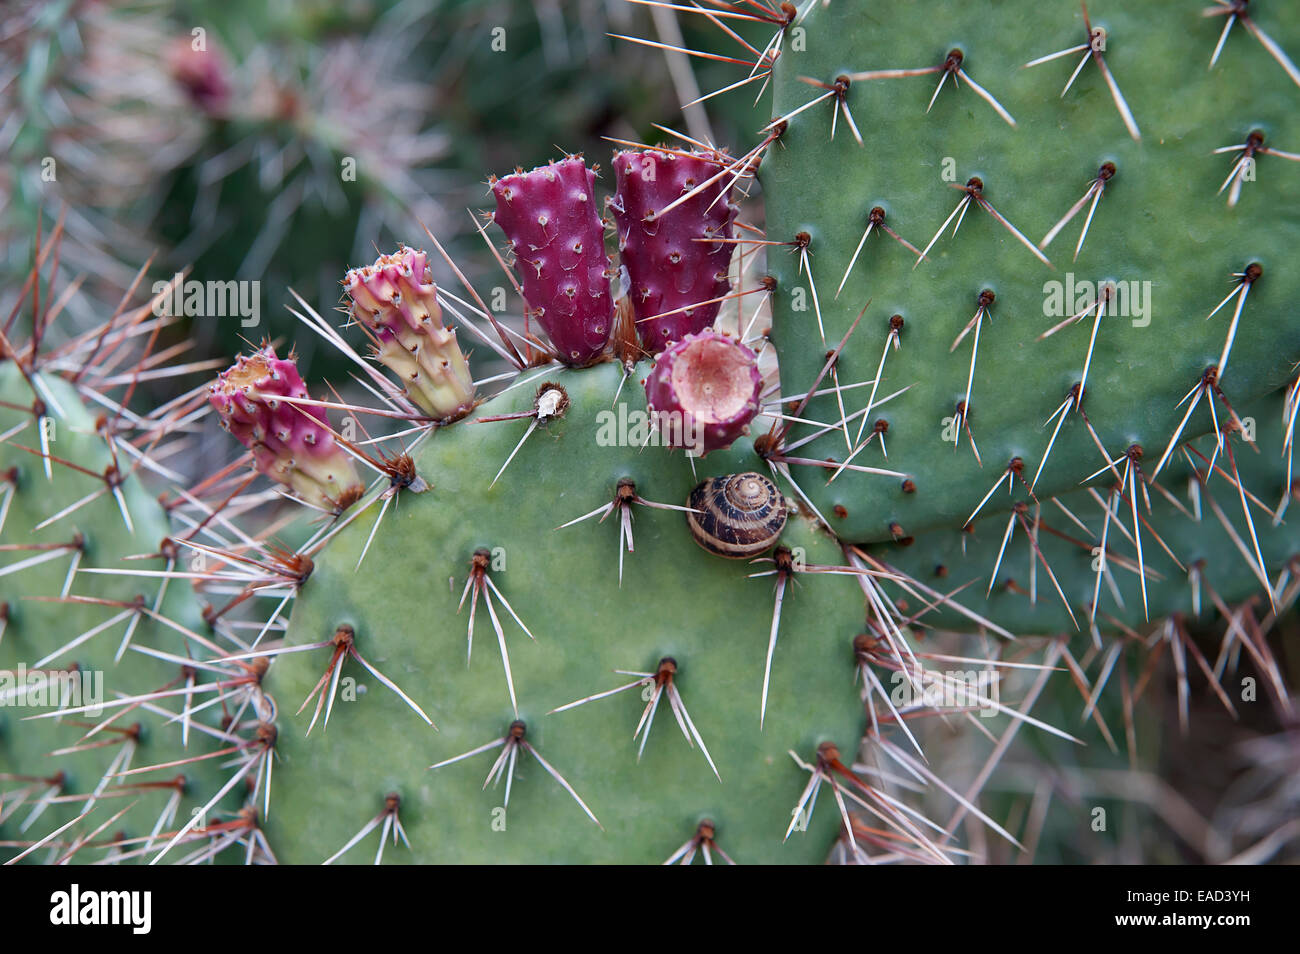 Prickly pear cactus, Opuntia humifusa, Purple subject, Green background. Stock Photo